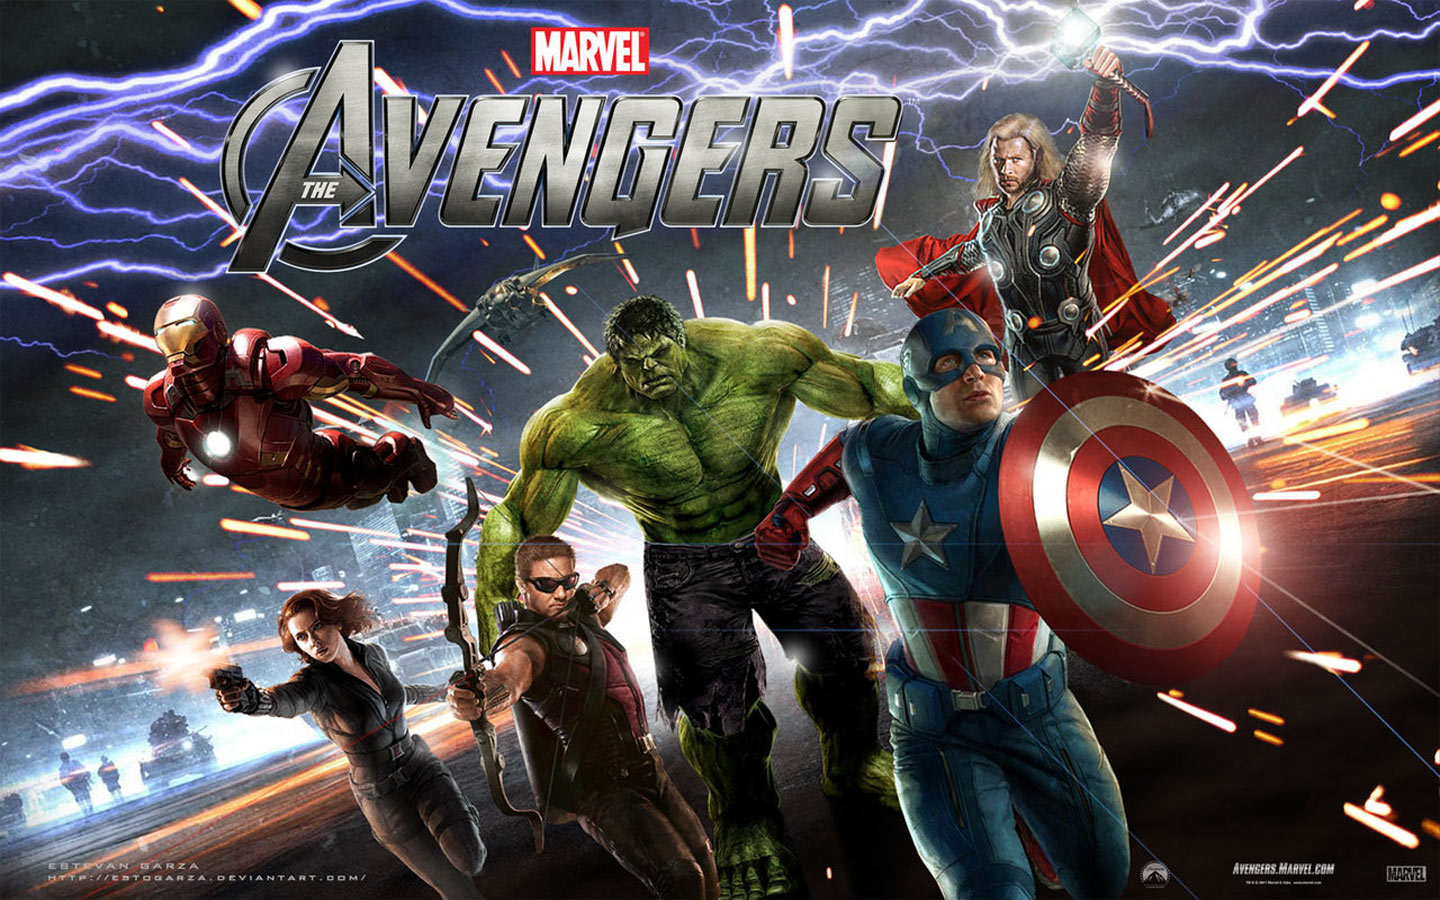 The Avengers 2012 The Ultimate Avengers 2012 The Avengers Assemble 2012 Movie Review Hollywood Movie Movie 2012 Hollywood Movie 2012 Movie Wallpapers